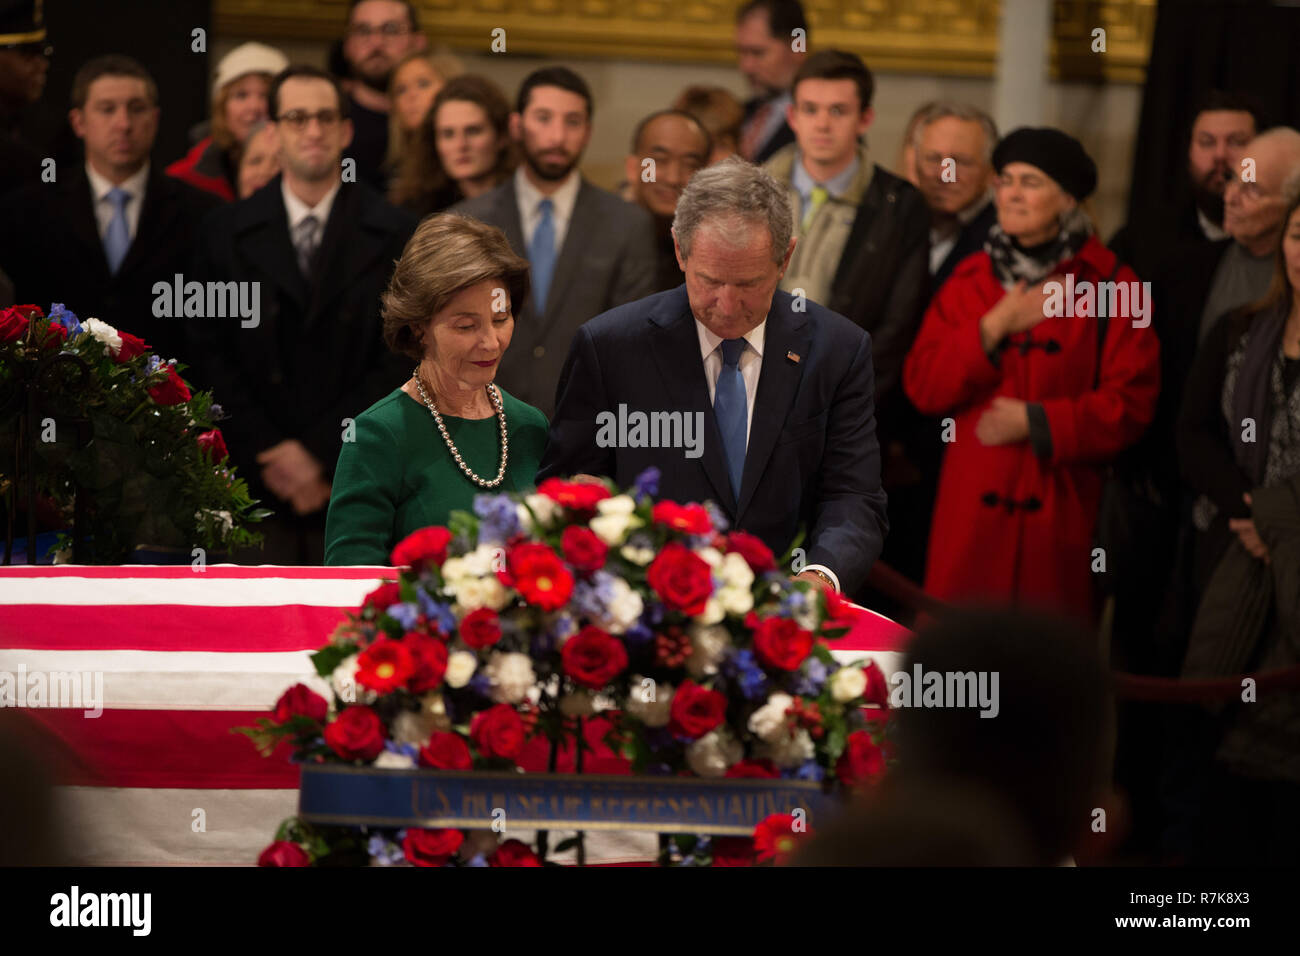 Former President George W. Bush and his wife Laura pay respect to his fathers flag draped casket, former President George H. W. Bush as as it lies in state at the Capitol Rotunda December 4, 2018 in Washington, DC. Bush, the 41st President, died in his Houston home at age 94. Stock Photo